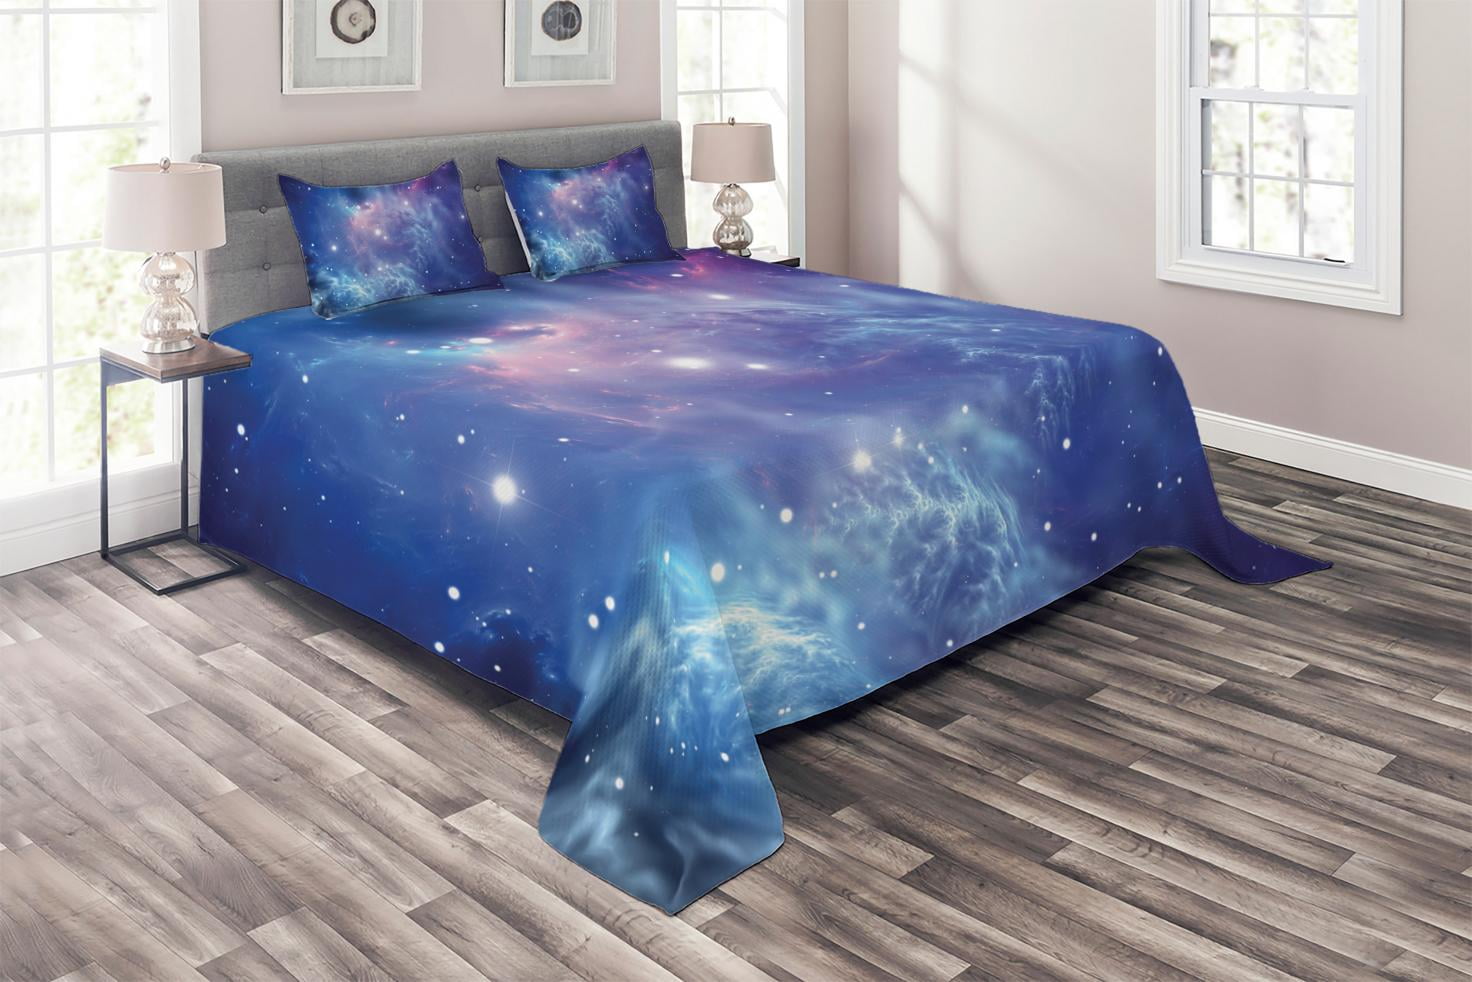 Decorative 3 Piece Bedding Set with 2 Pillow Shams Nebula Dark Galaxy with Luminous Stars and Cosmic Rays Astronomy Explore Theme Ambesonne Space Duvet Cover Set Queen Size Purple Blue 